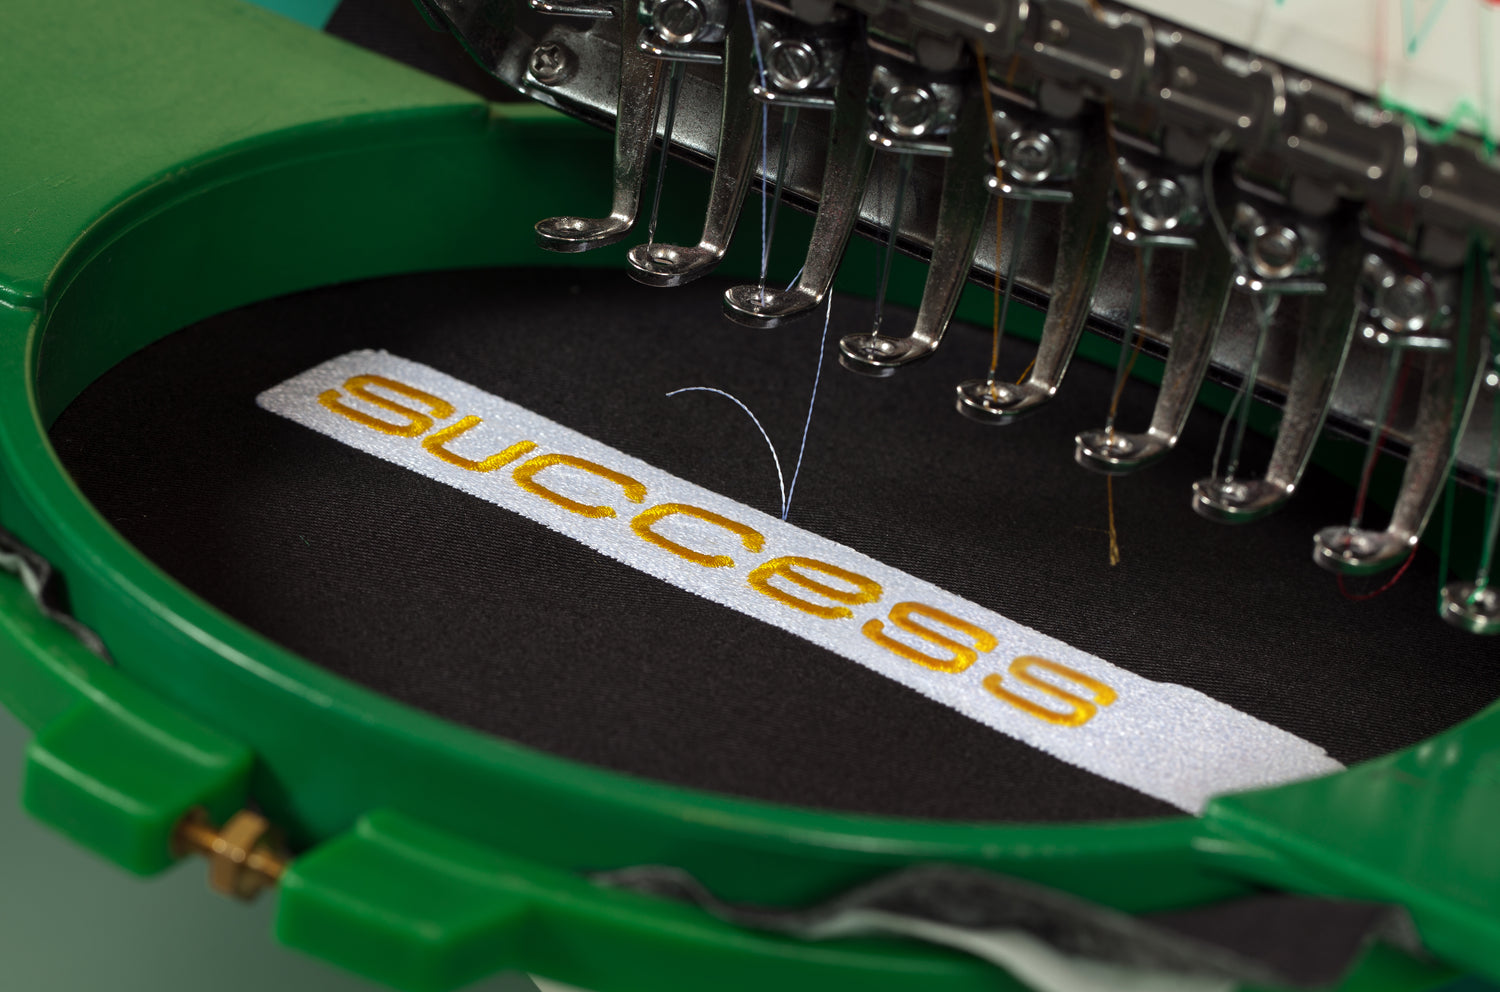 Exquisite Craftsmanship: Close-Up of Embroidery Process with Logo in Embroidery Frame, Creating Elegant and Detailed Designs